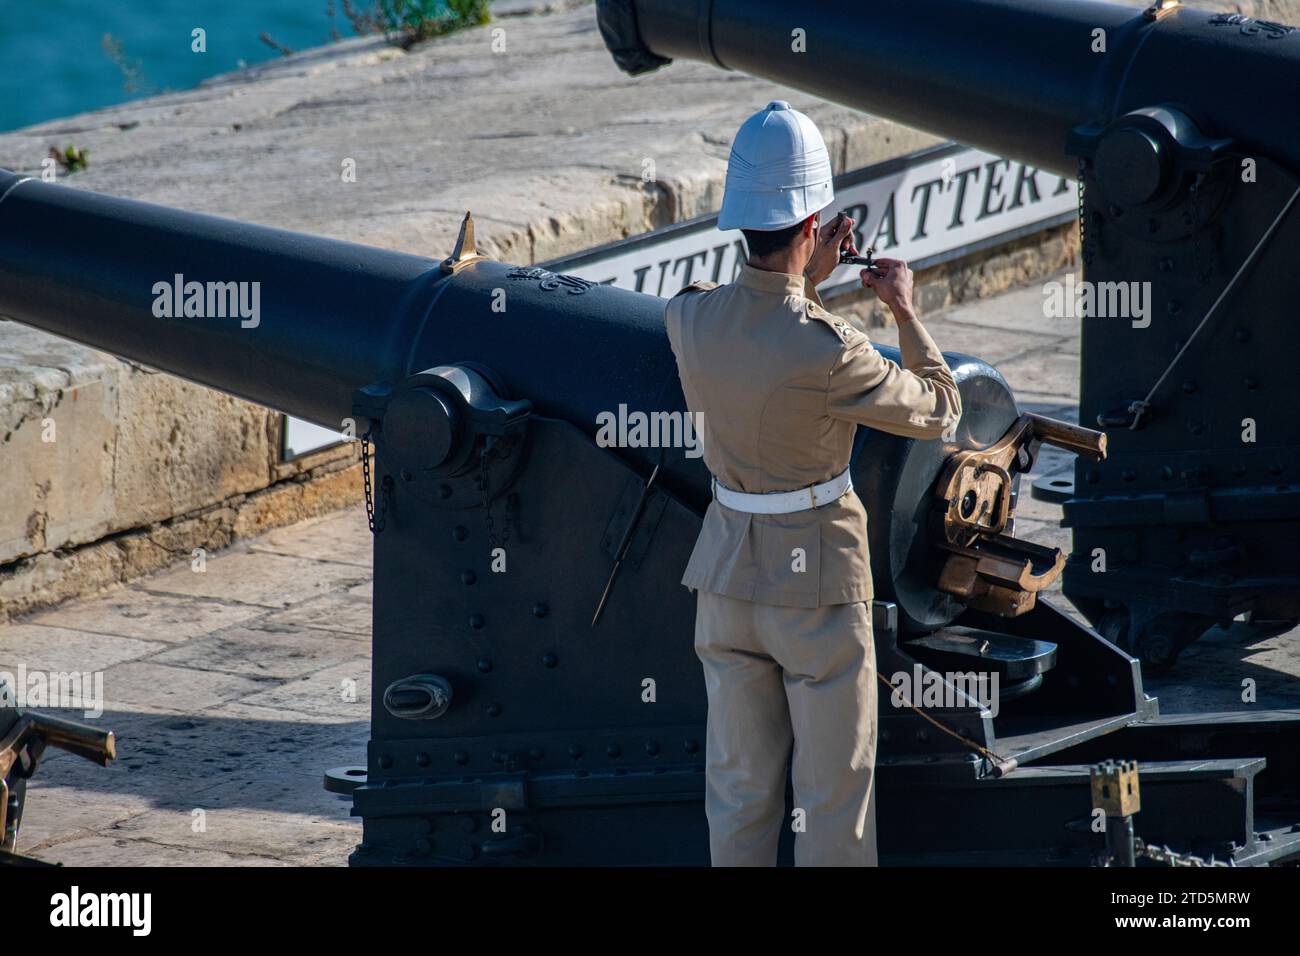 A cannon is fired from Valletta in Malta - the daily saluting battery Stock Photo